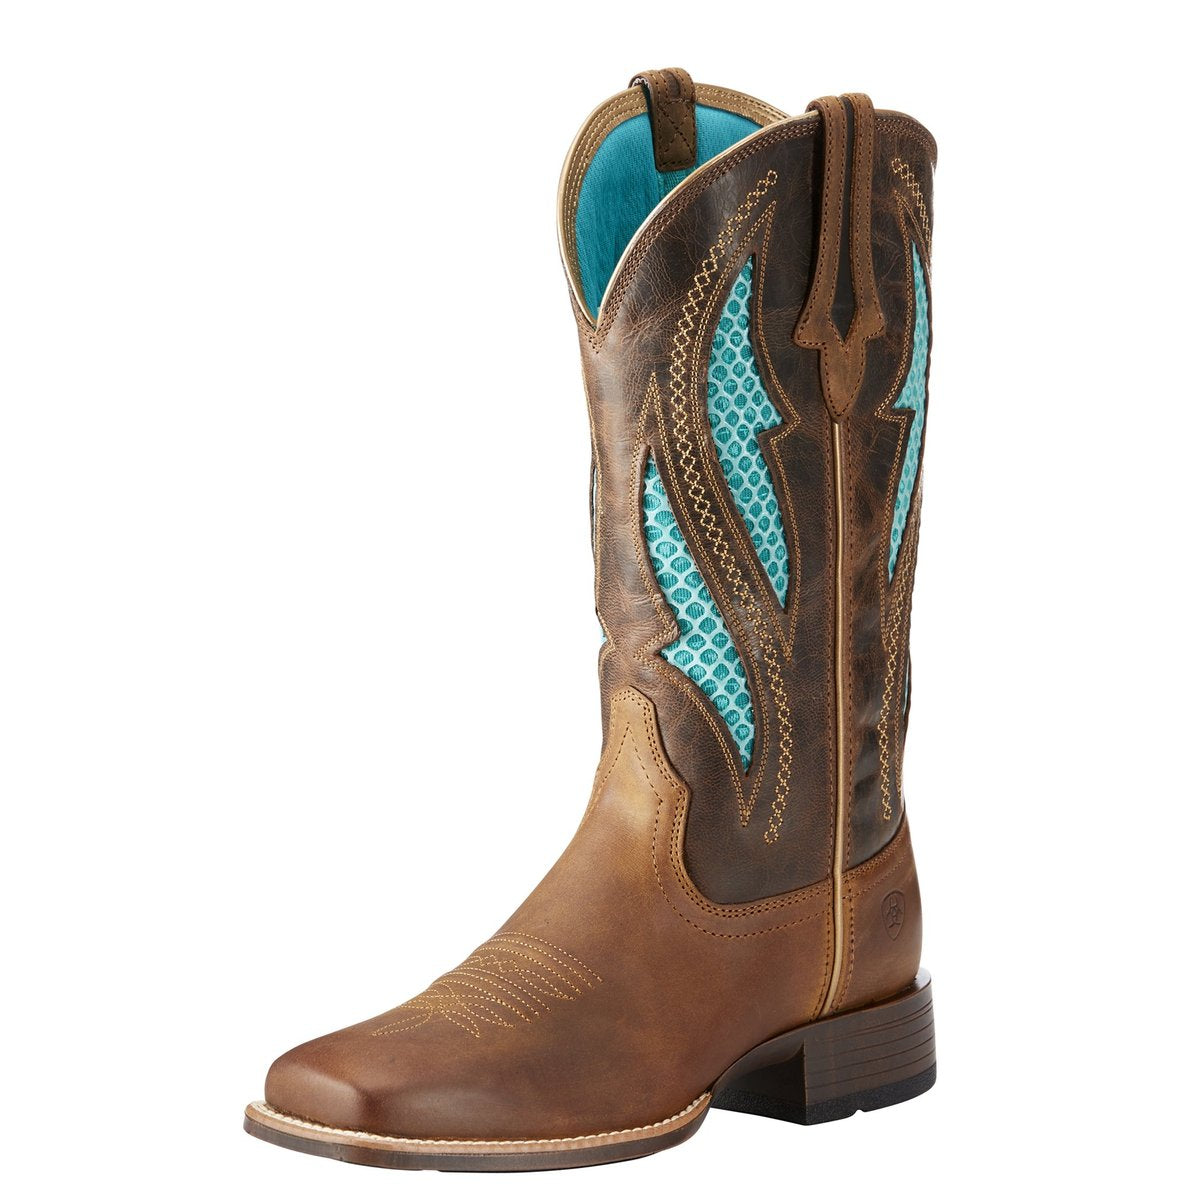 Ariat Wms Venttek Ultra Distressed Brown/Silly Brown - Mothers Day Sale